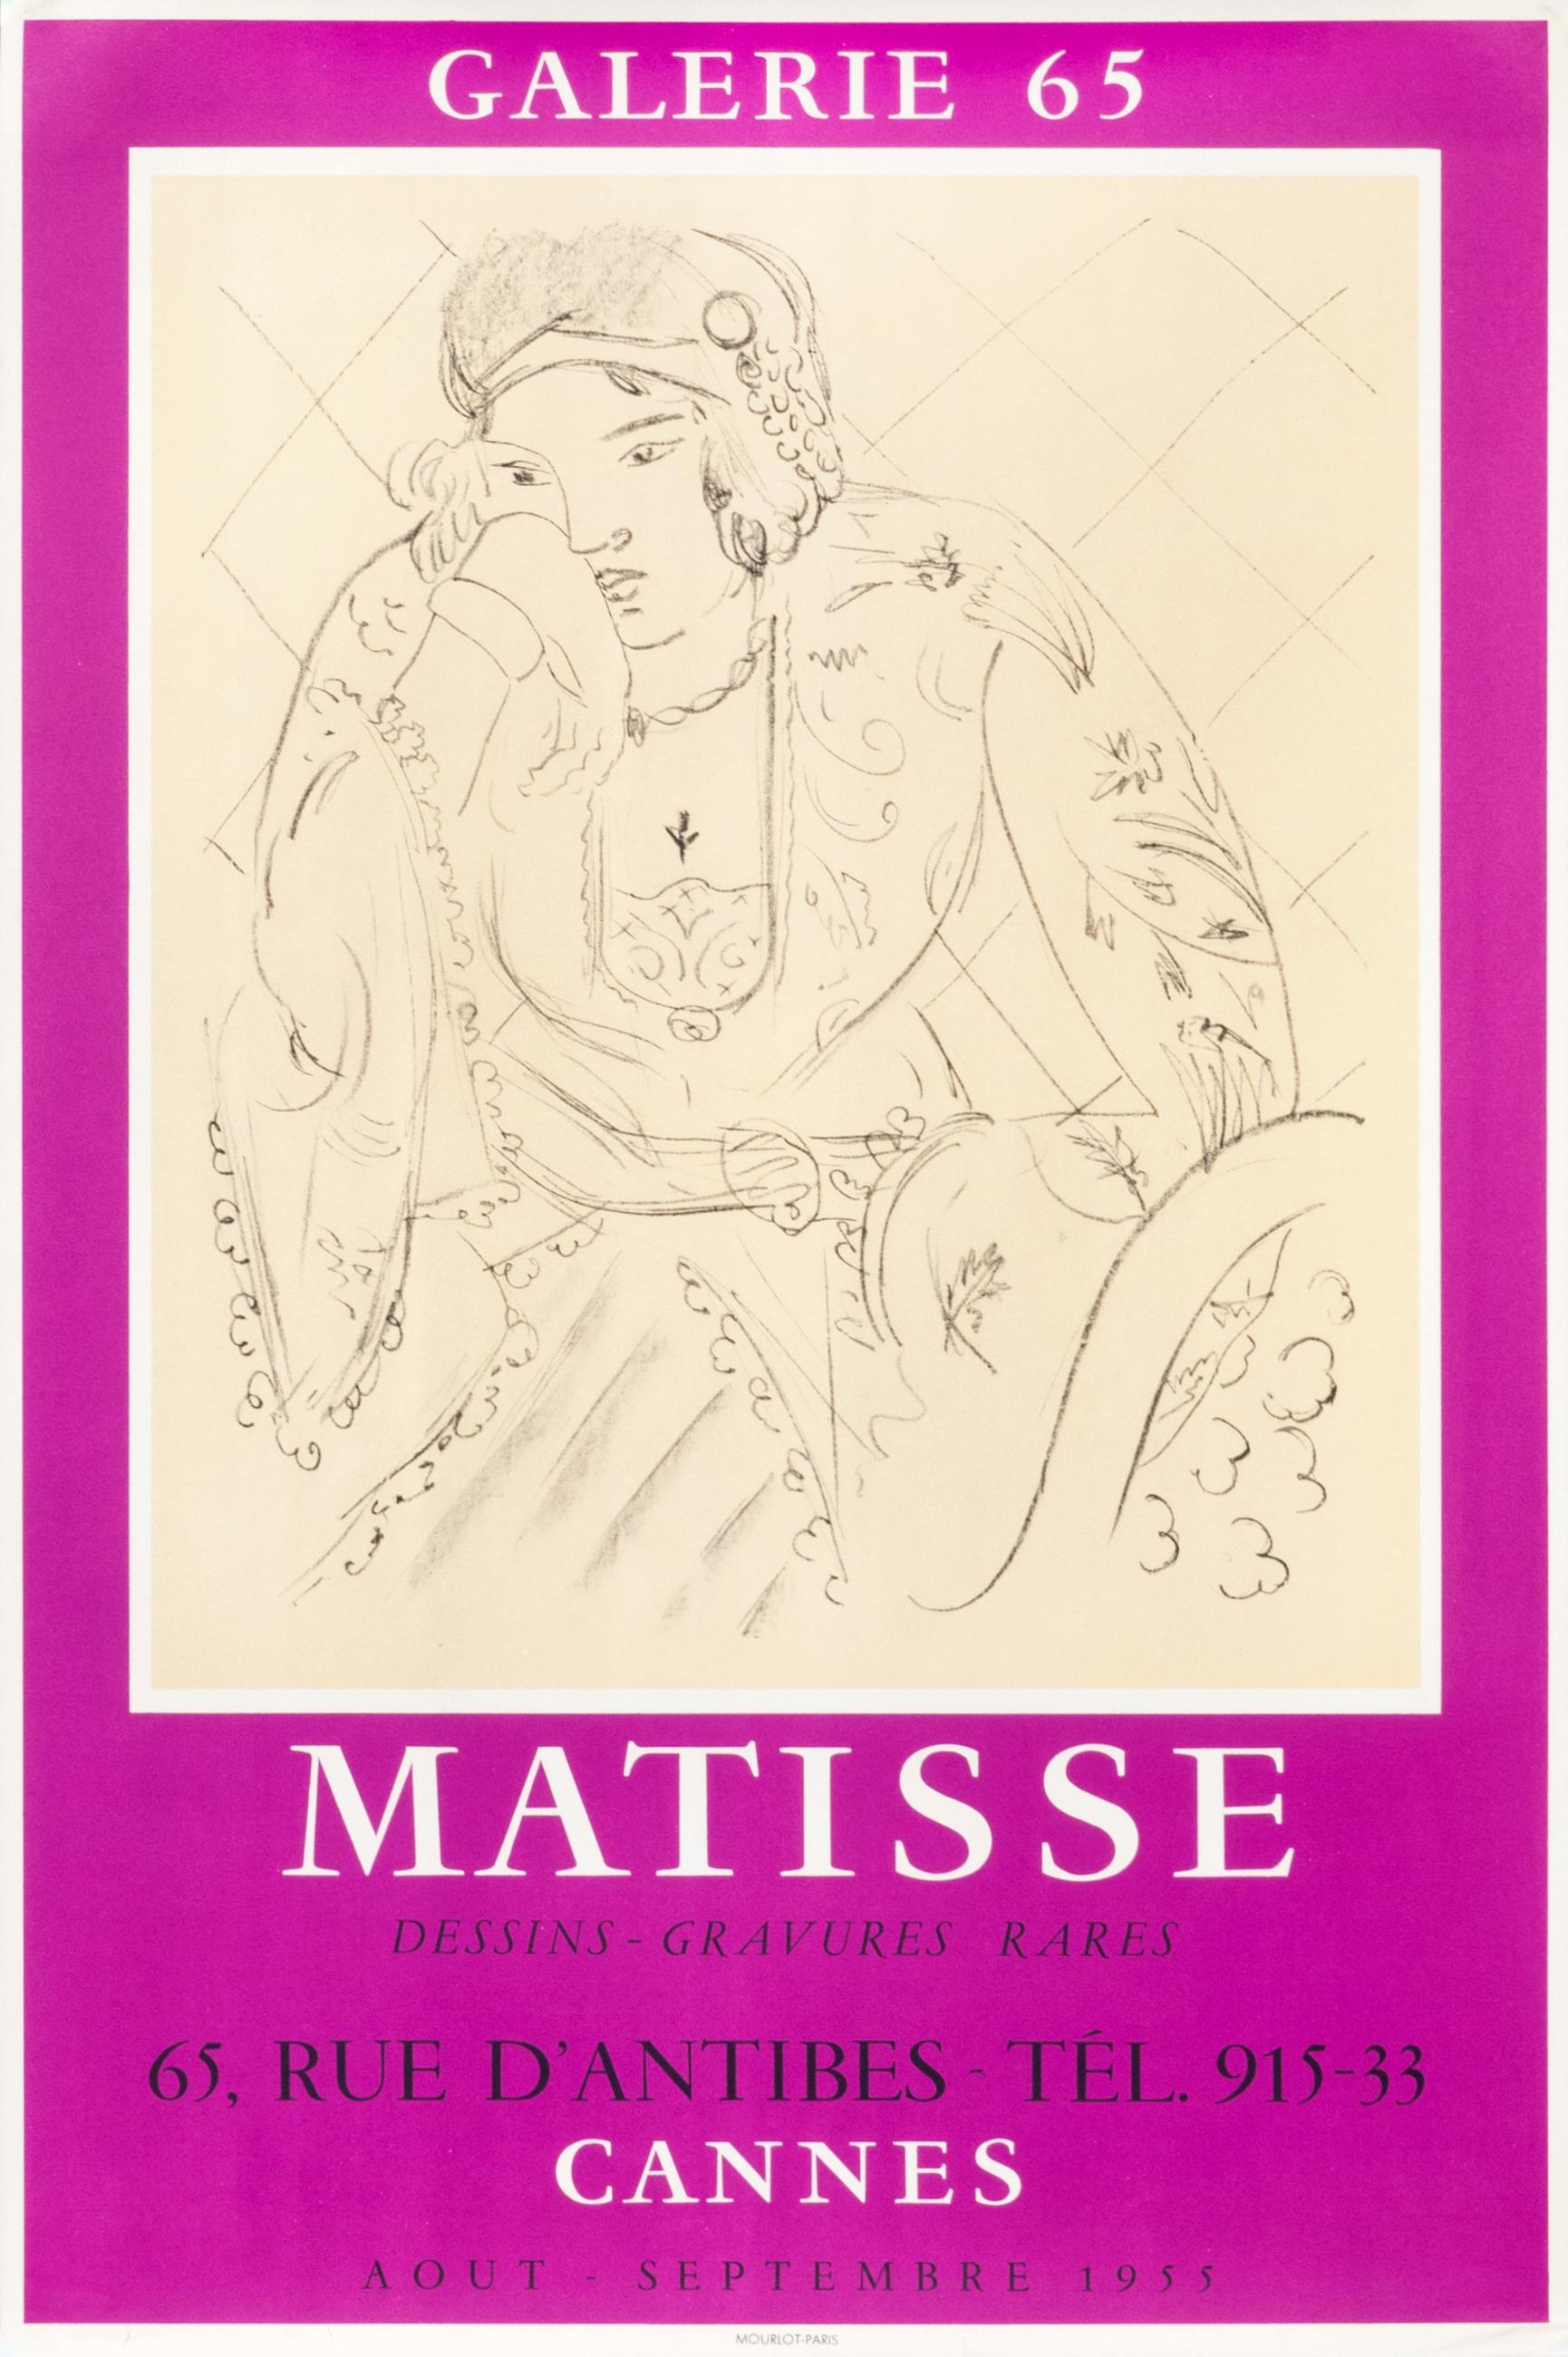 Matisse Drawings and Engravings, Galerie 65 - French Exhibition Poster 1950s - Print by Henri Matisse